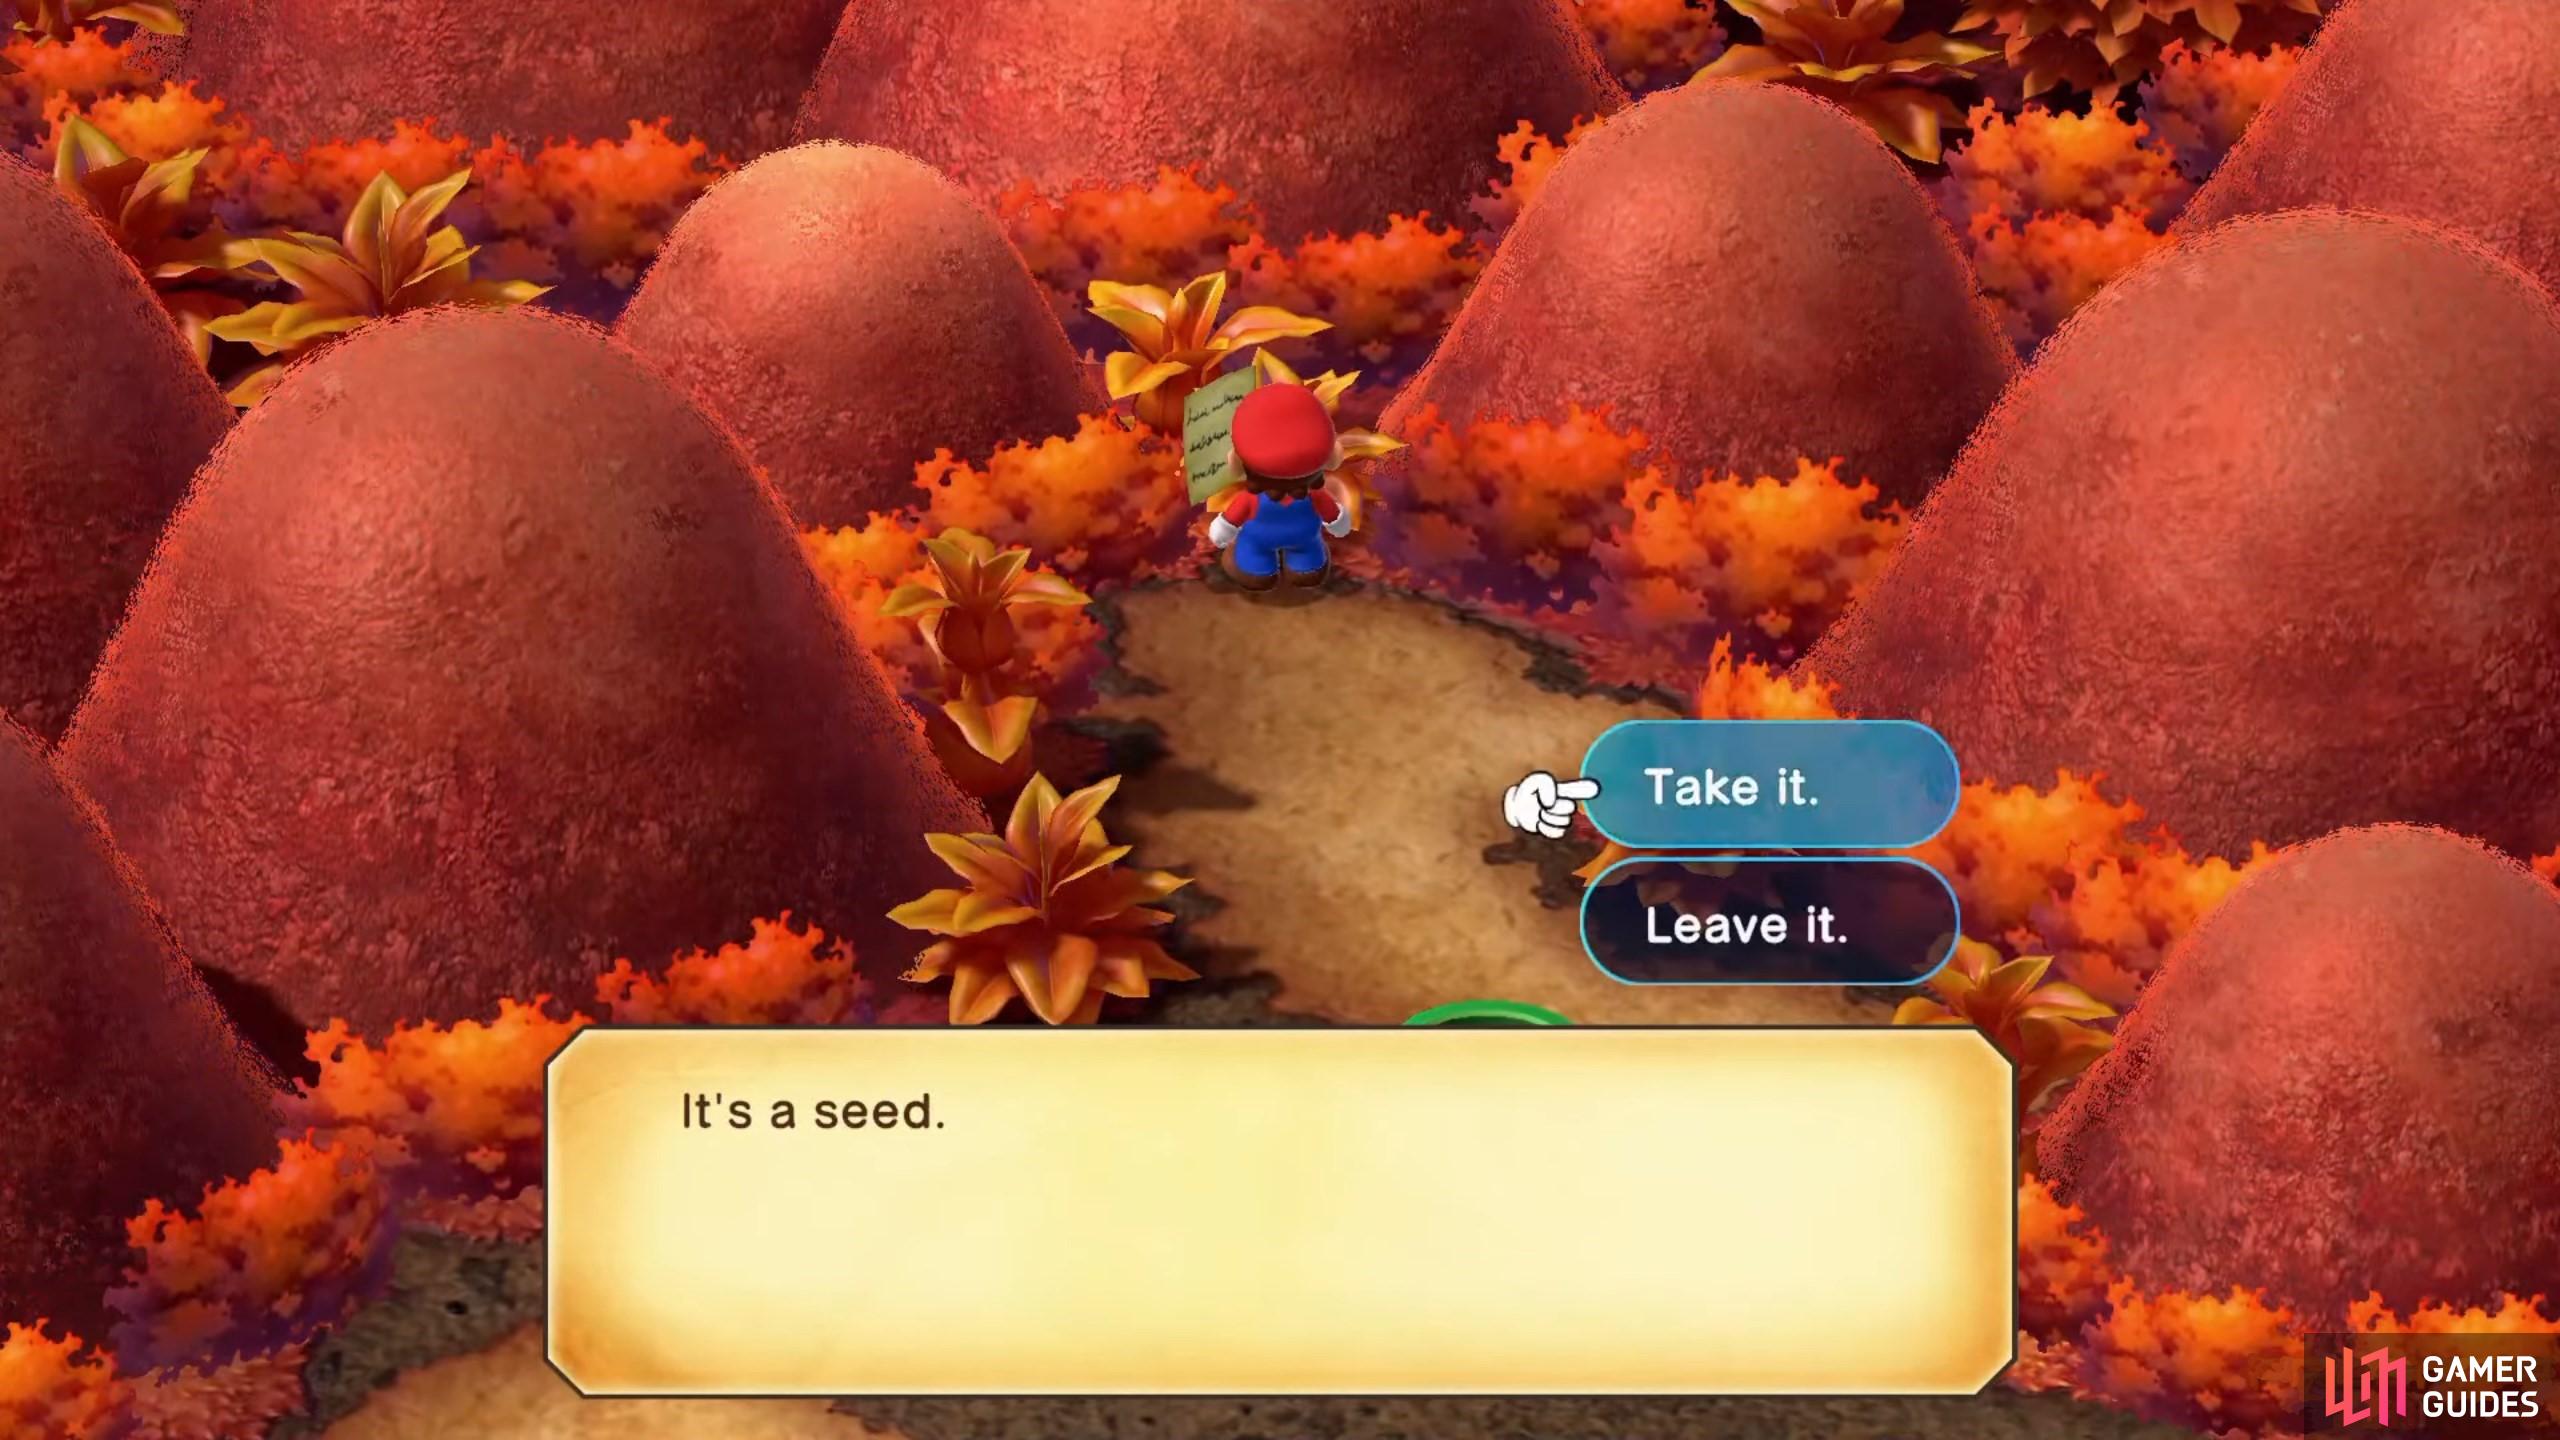 The Seed can be obtained from the floating note after the boss fight.